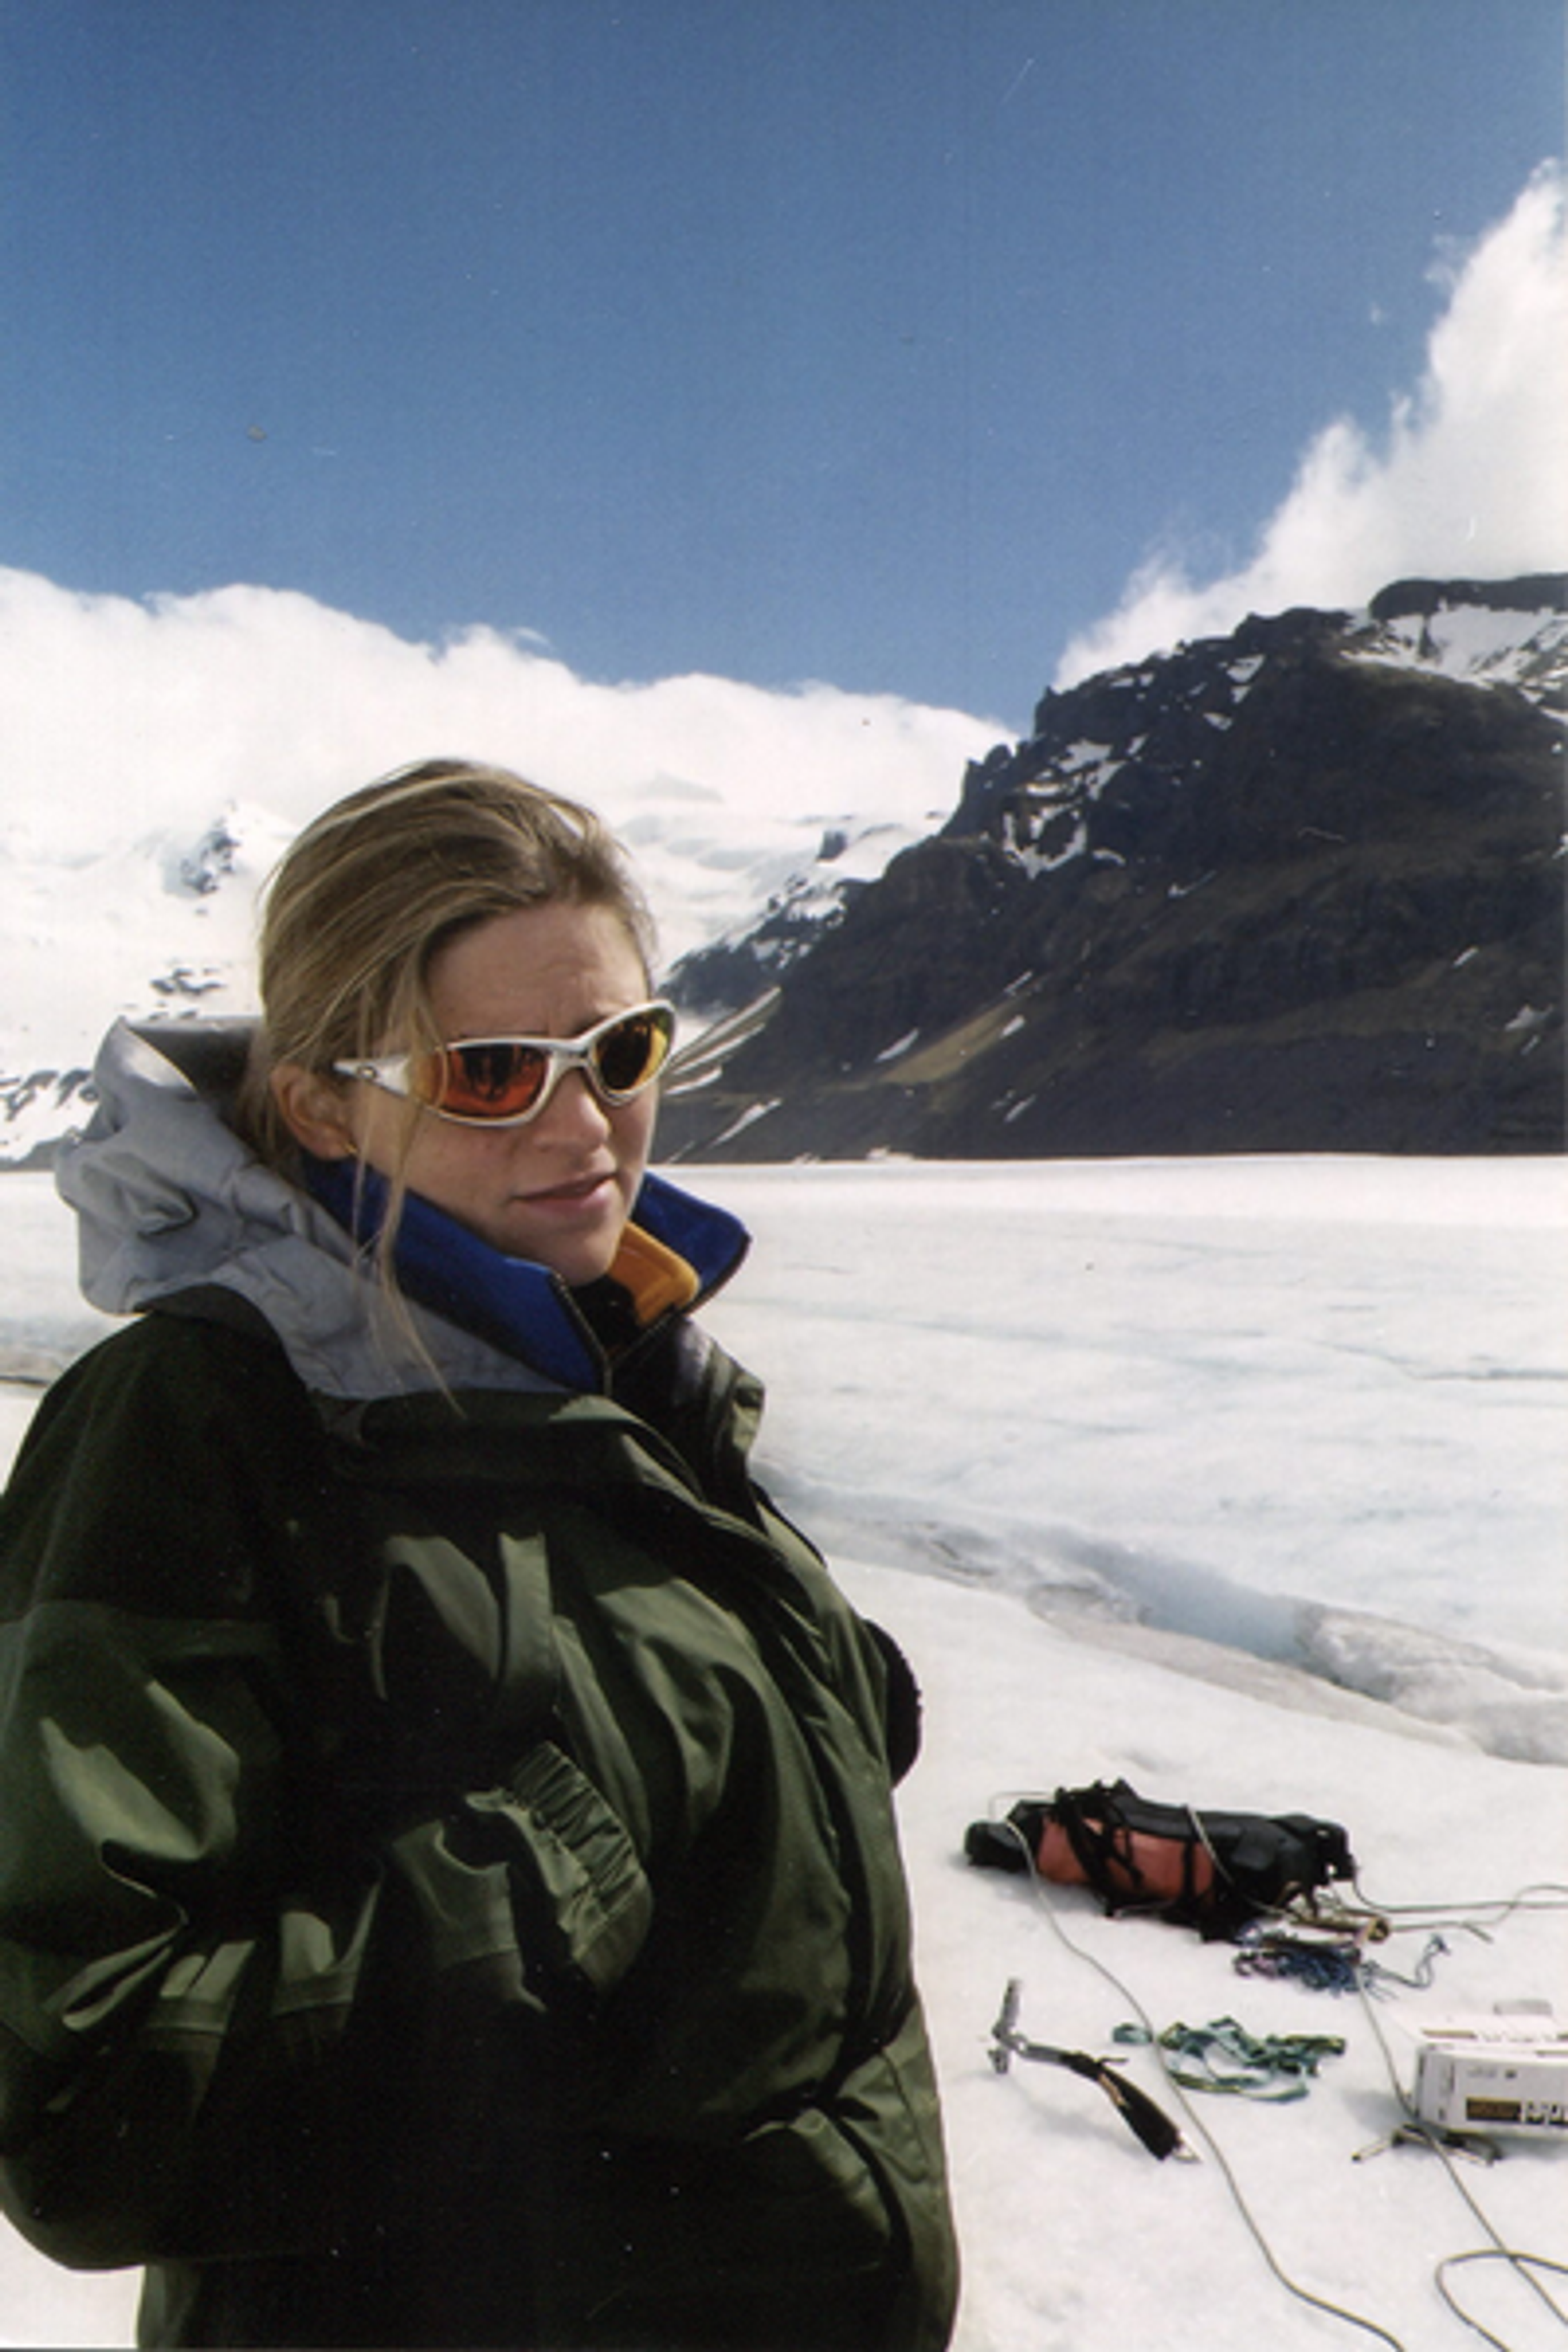 A person wearing sunglasses and a winter jacket stands in the foreground with a vast expanse of ice and snow stretching out behind them, under a mountainous horizon and blue sky. They appear equipped for a cold environment, with a radio and equipment visible on the icy ground.